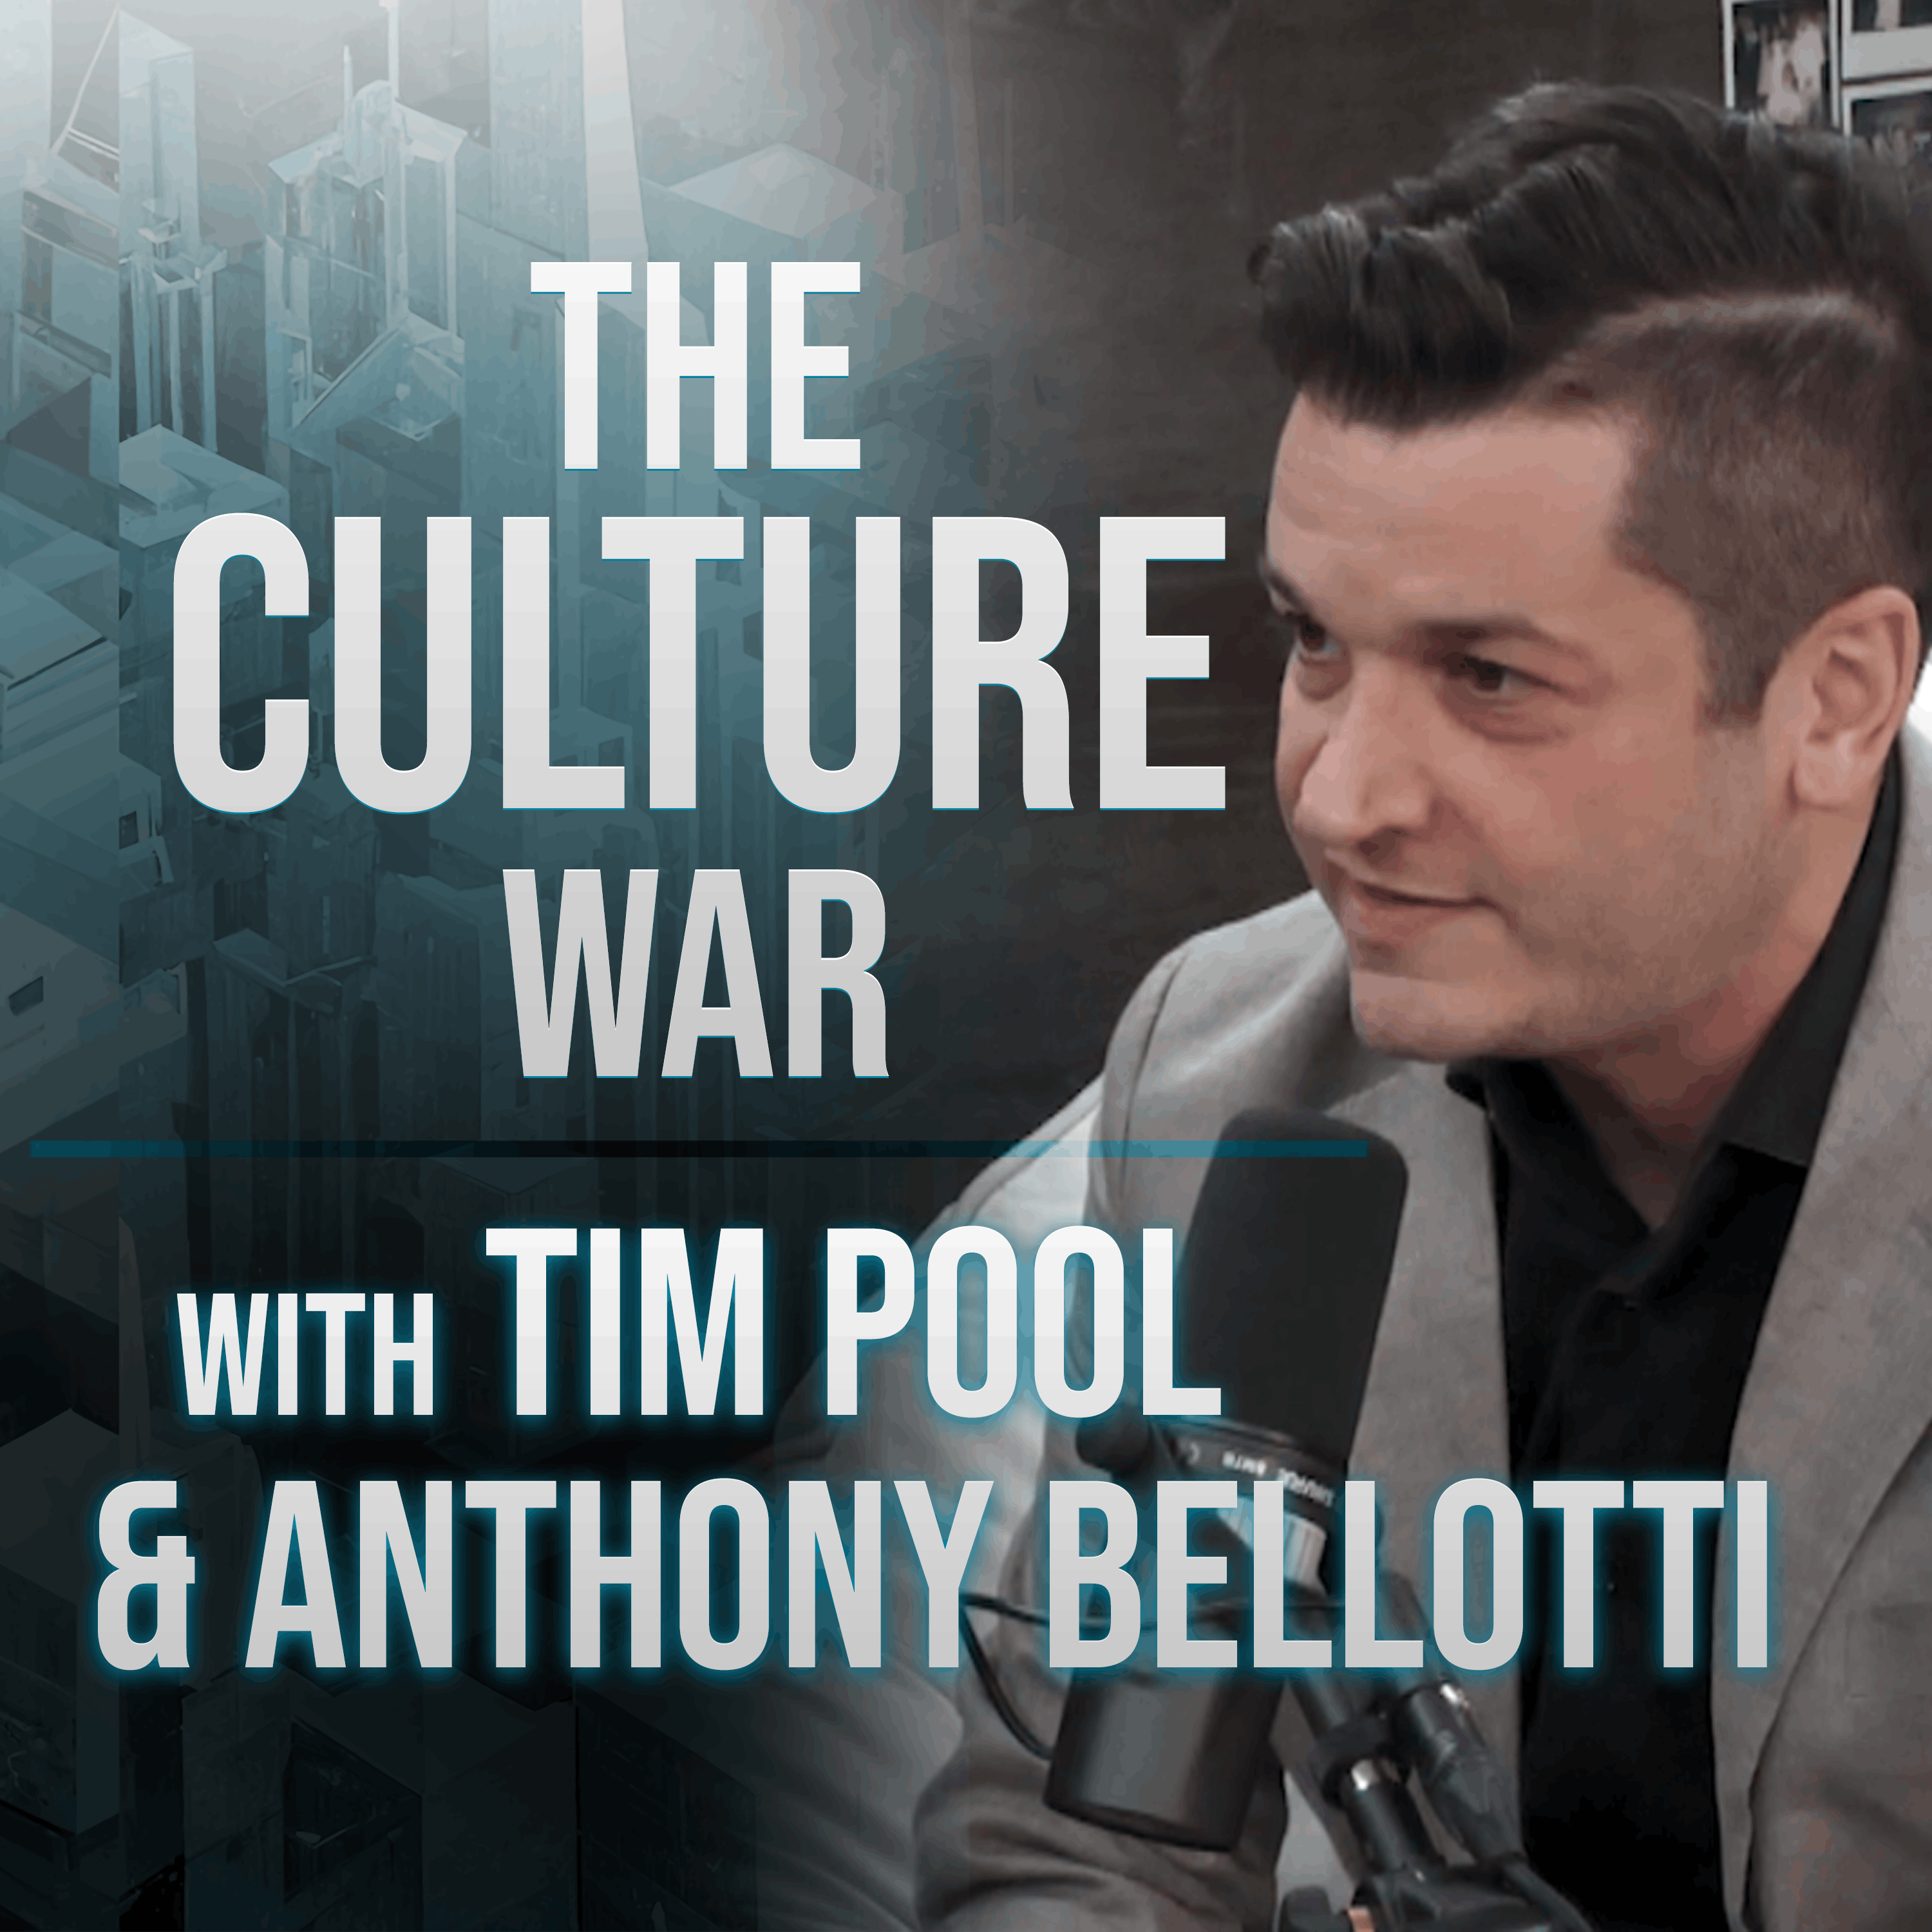 The Culture War #13 - Anthony Bellotti, EXPOSING Dr. Fauci Corruption And COVID Lab Leak